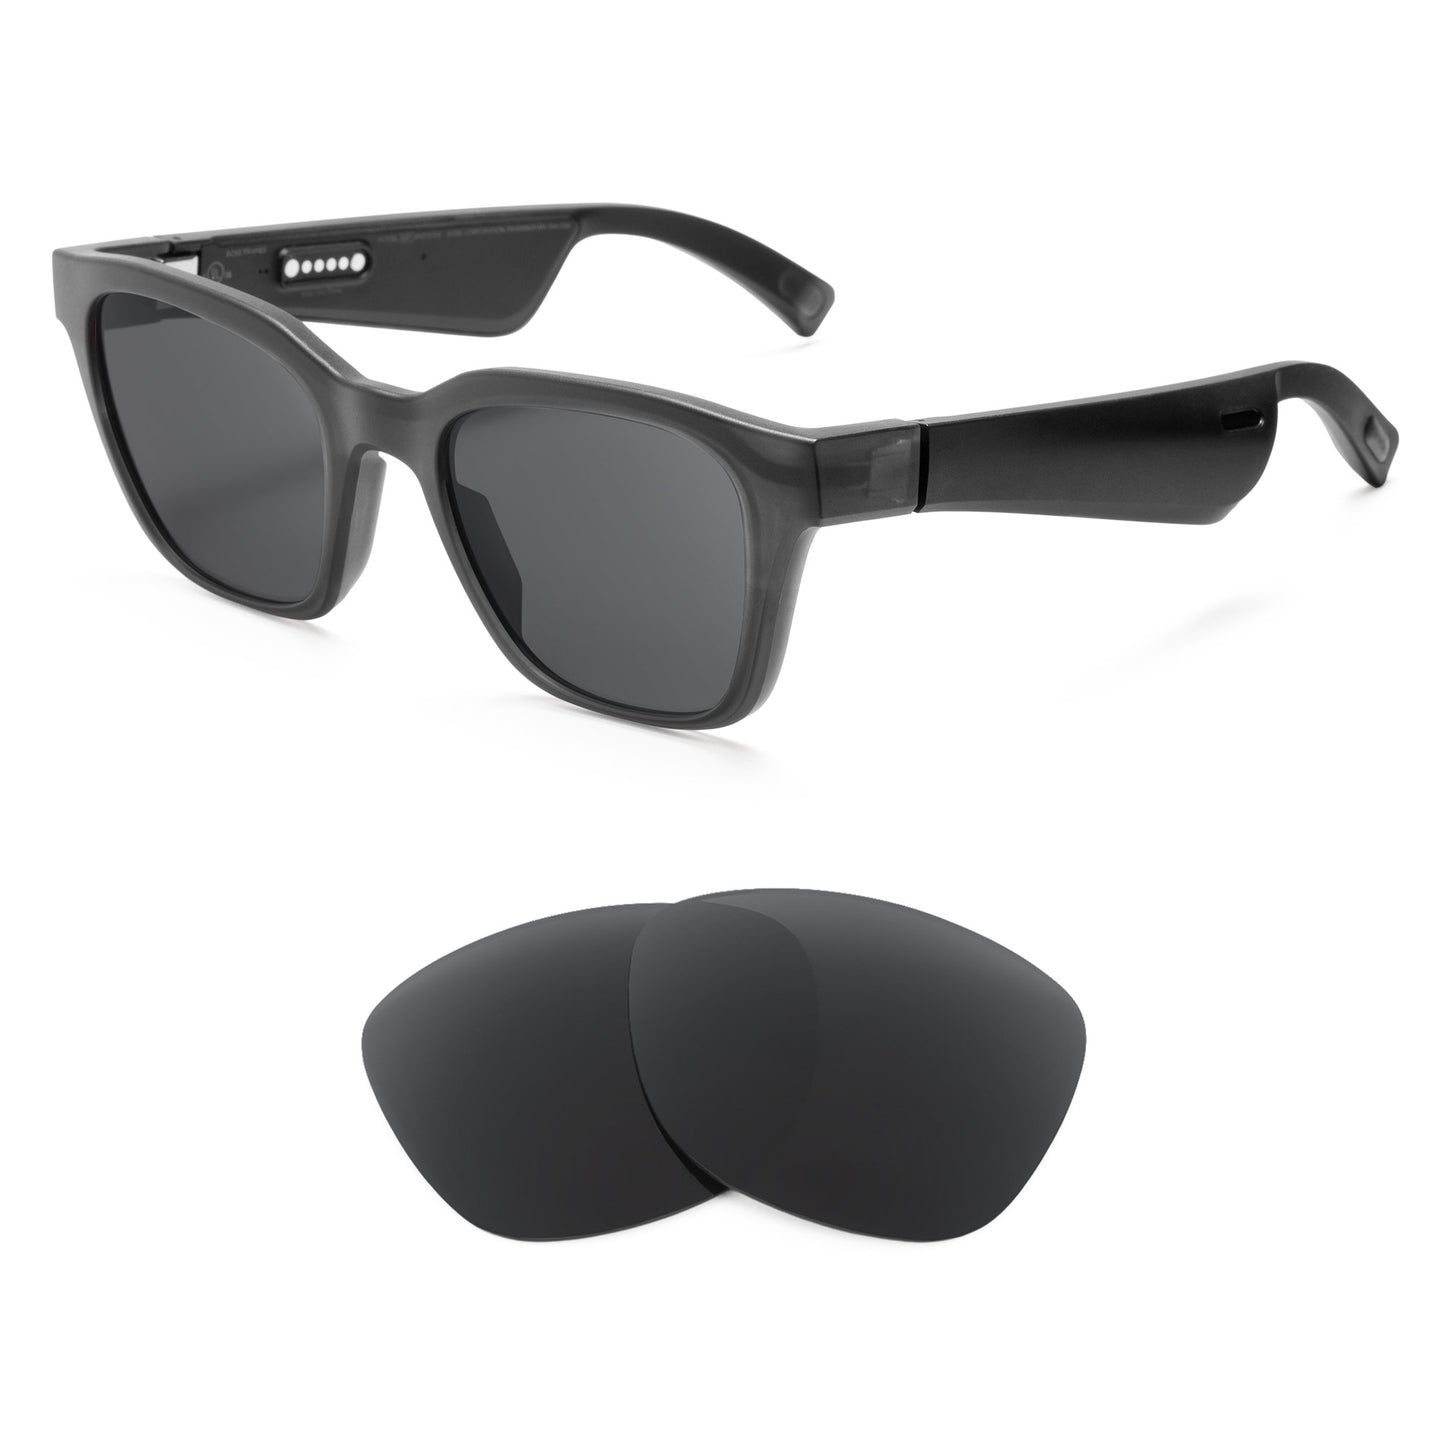 Bose Alto S/M sunglasses with replacement lenses